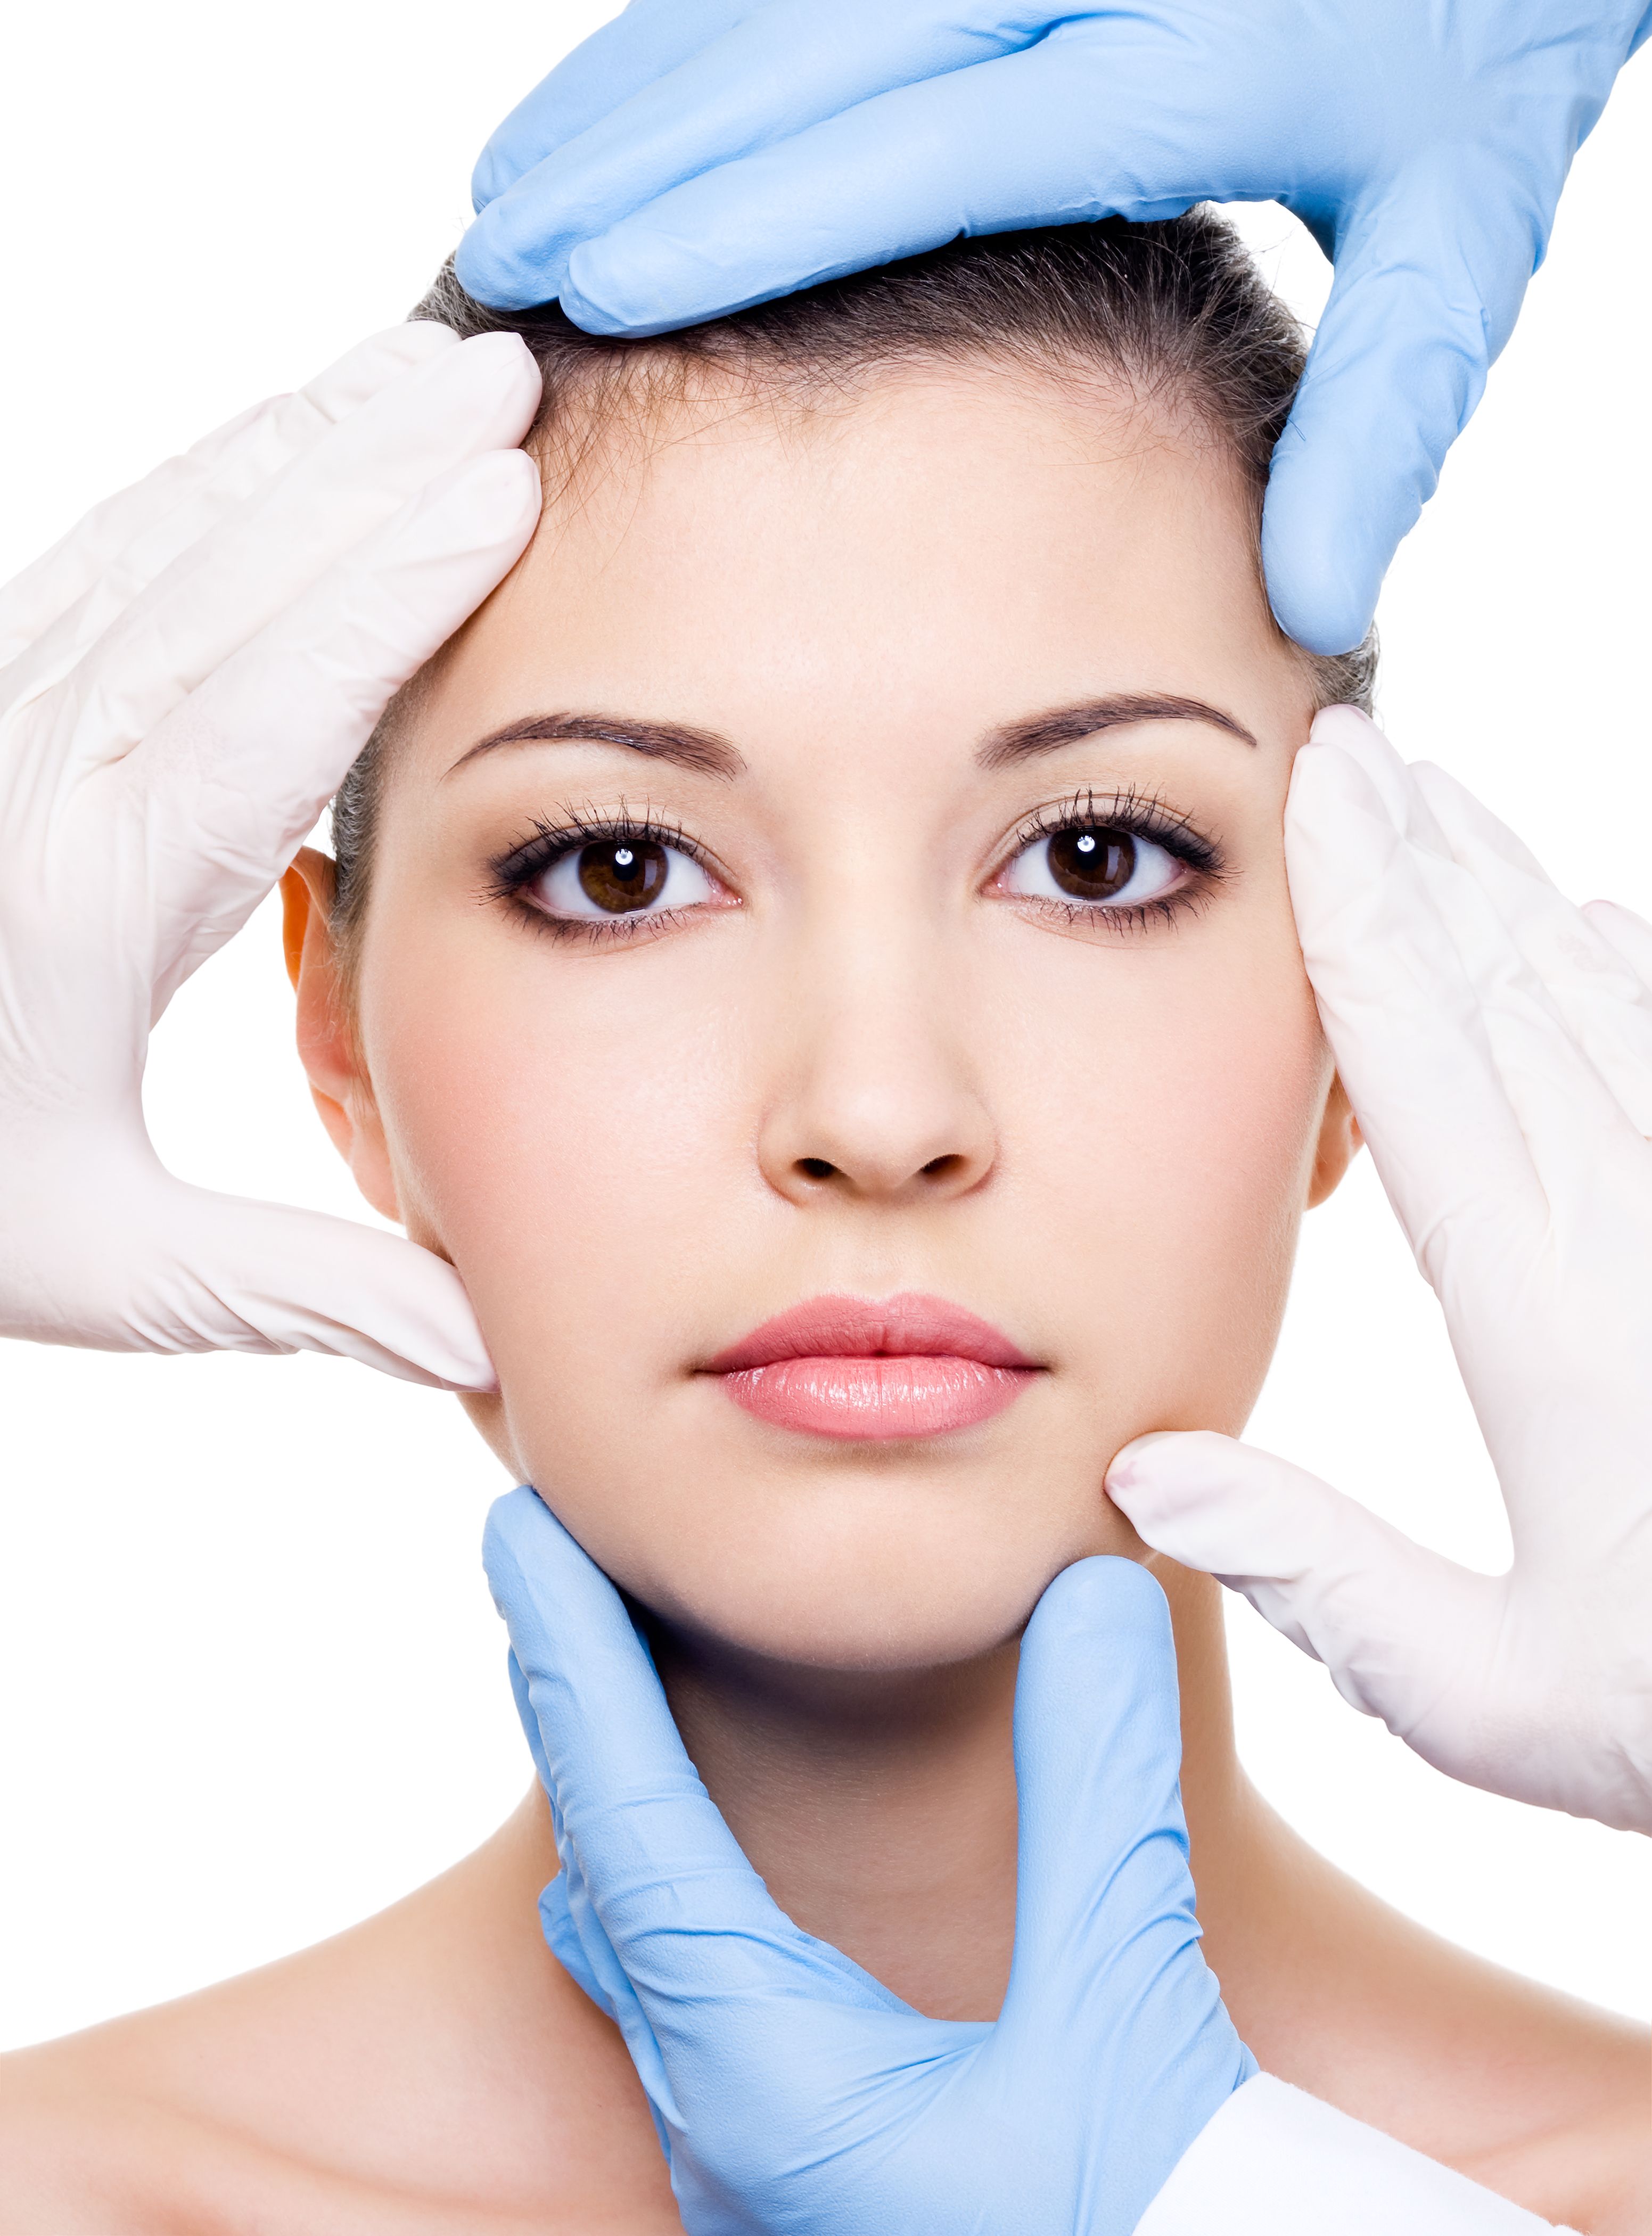 5 Reasons Why You Should Choose the Chicago Cosmetic Surgeons